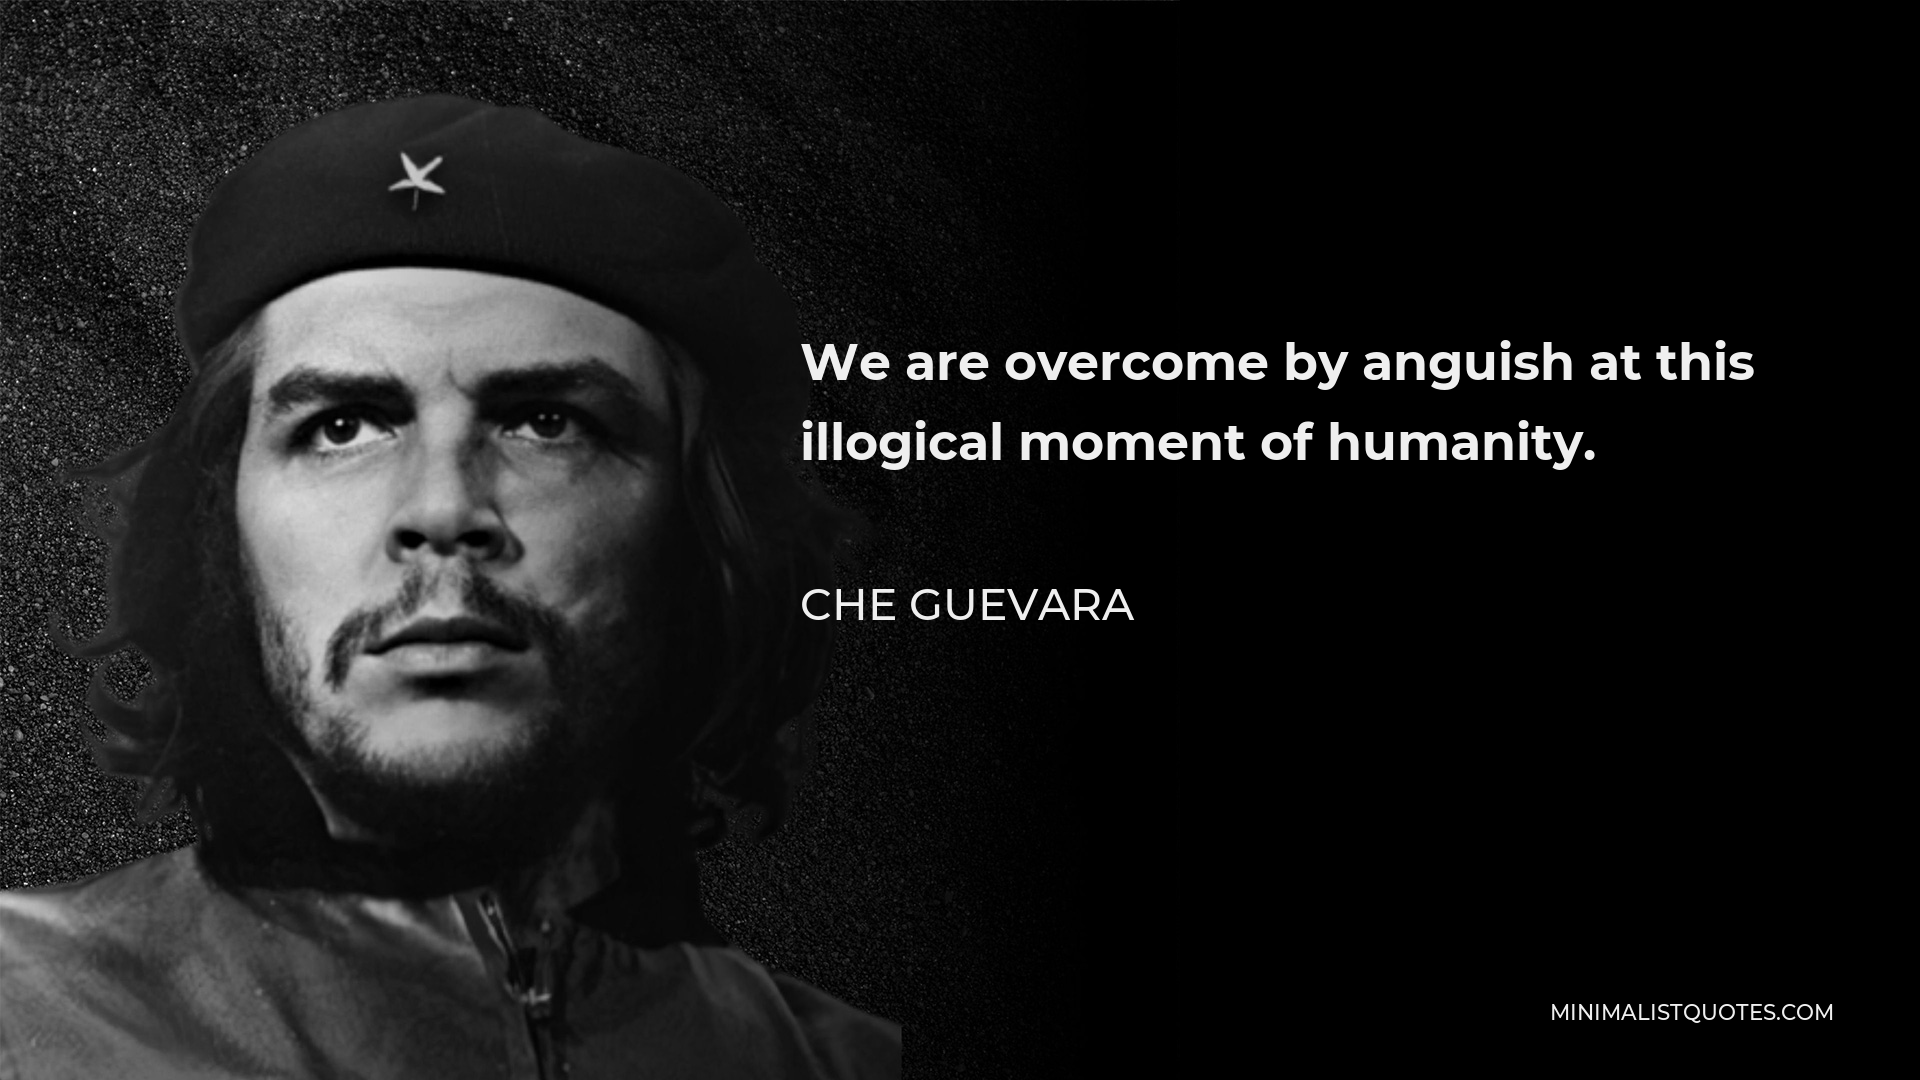 Che Guevara Quote - We are overcome by anguish at this illogical moment of humanity.